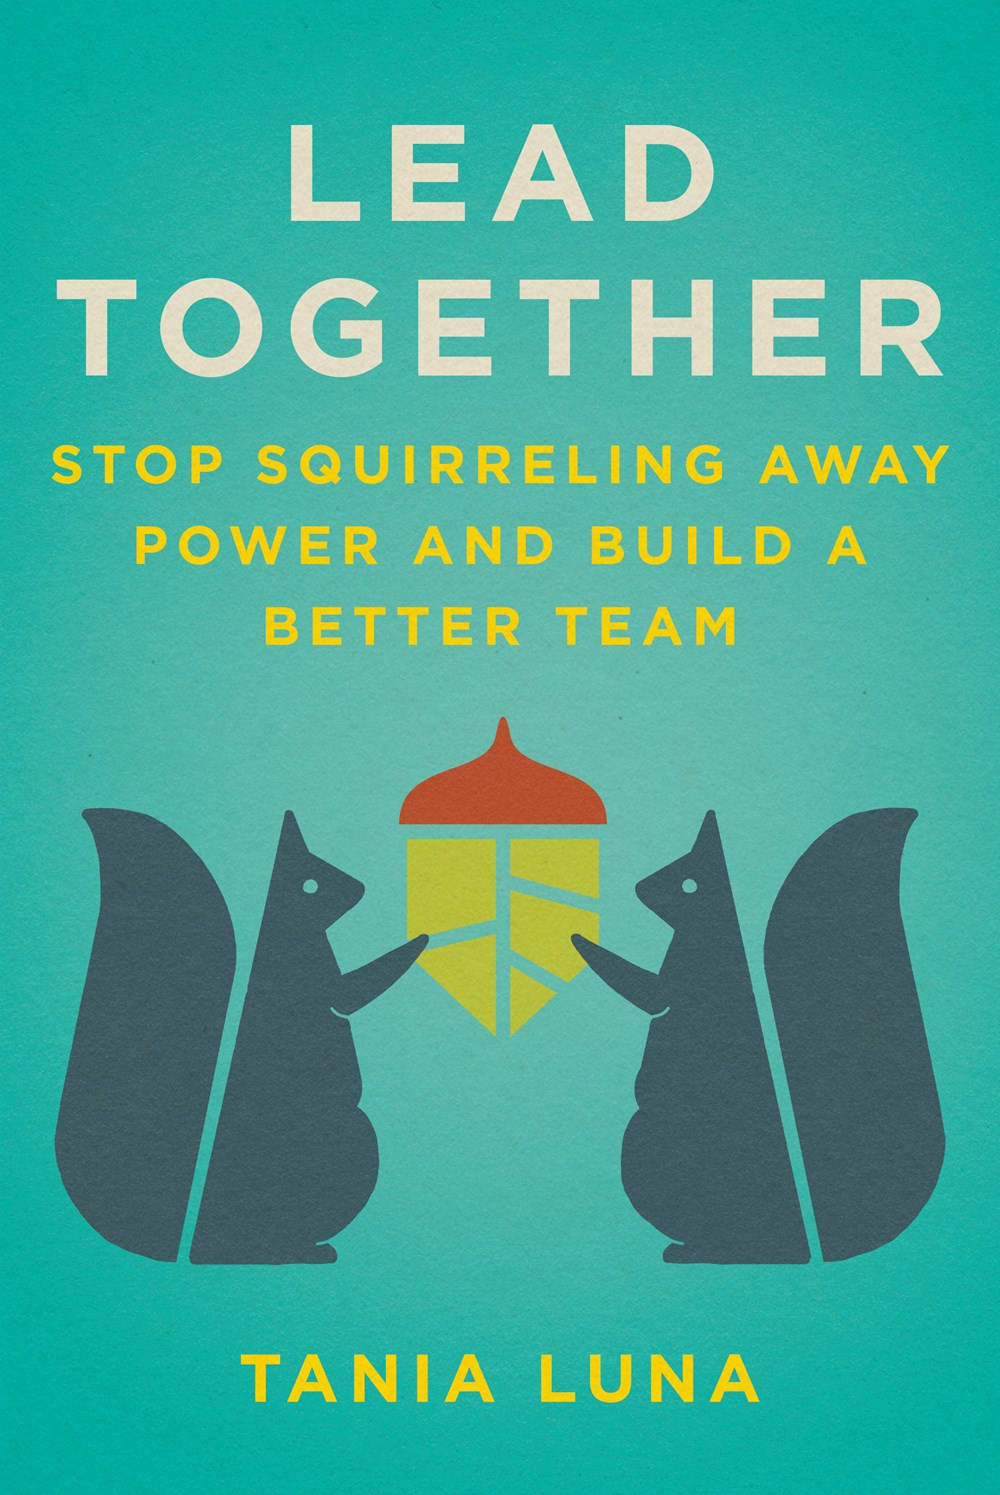  Lead Together: Stop Squirreling Away Power and Build a Better Team